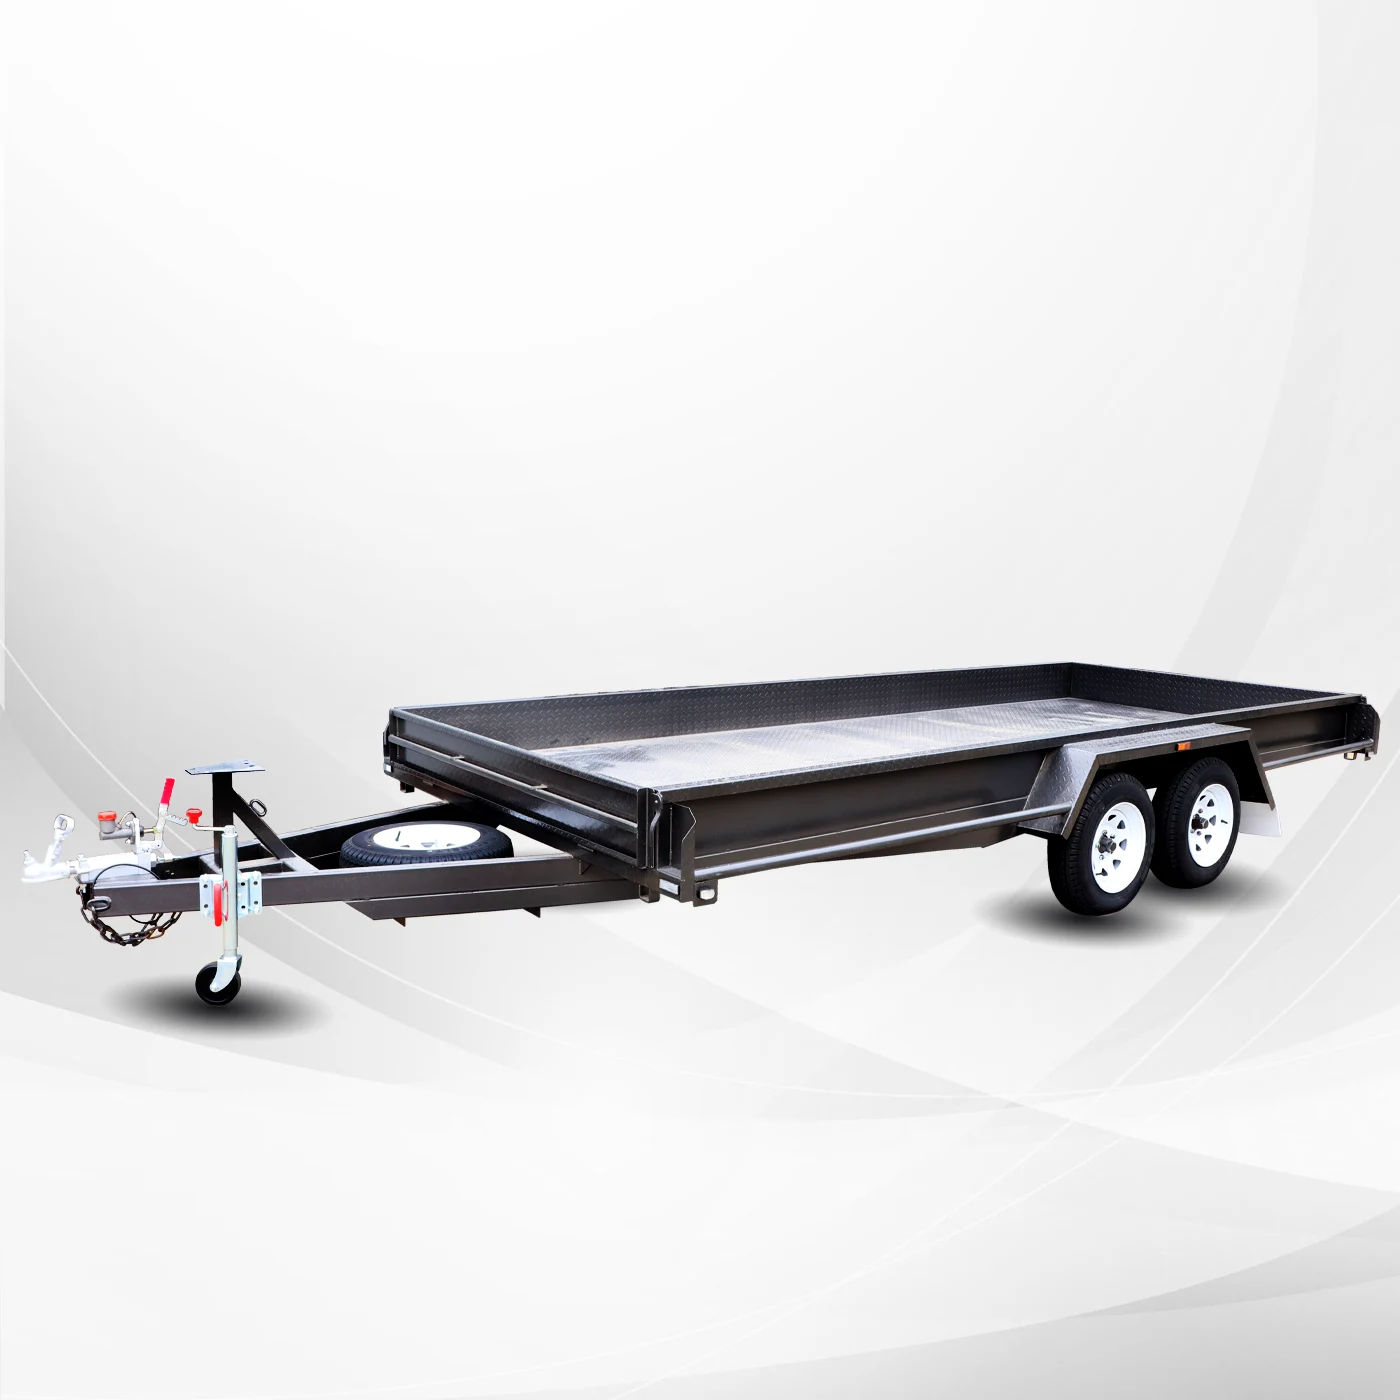 16x6'6" Box Car Carrier Trailer for Sale with Sides